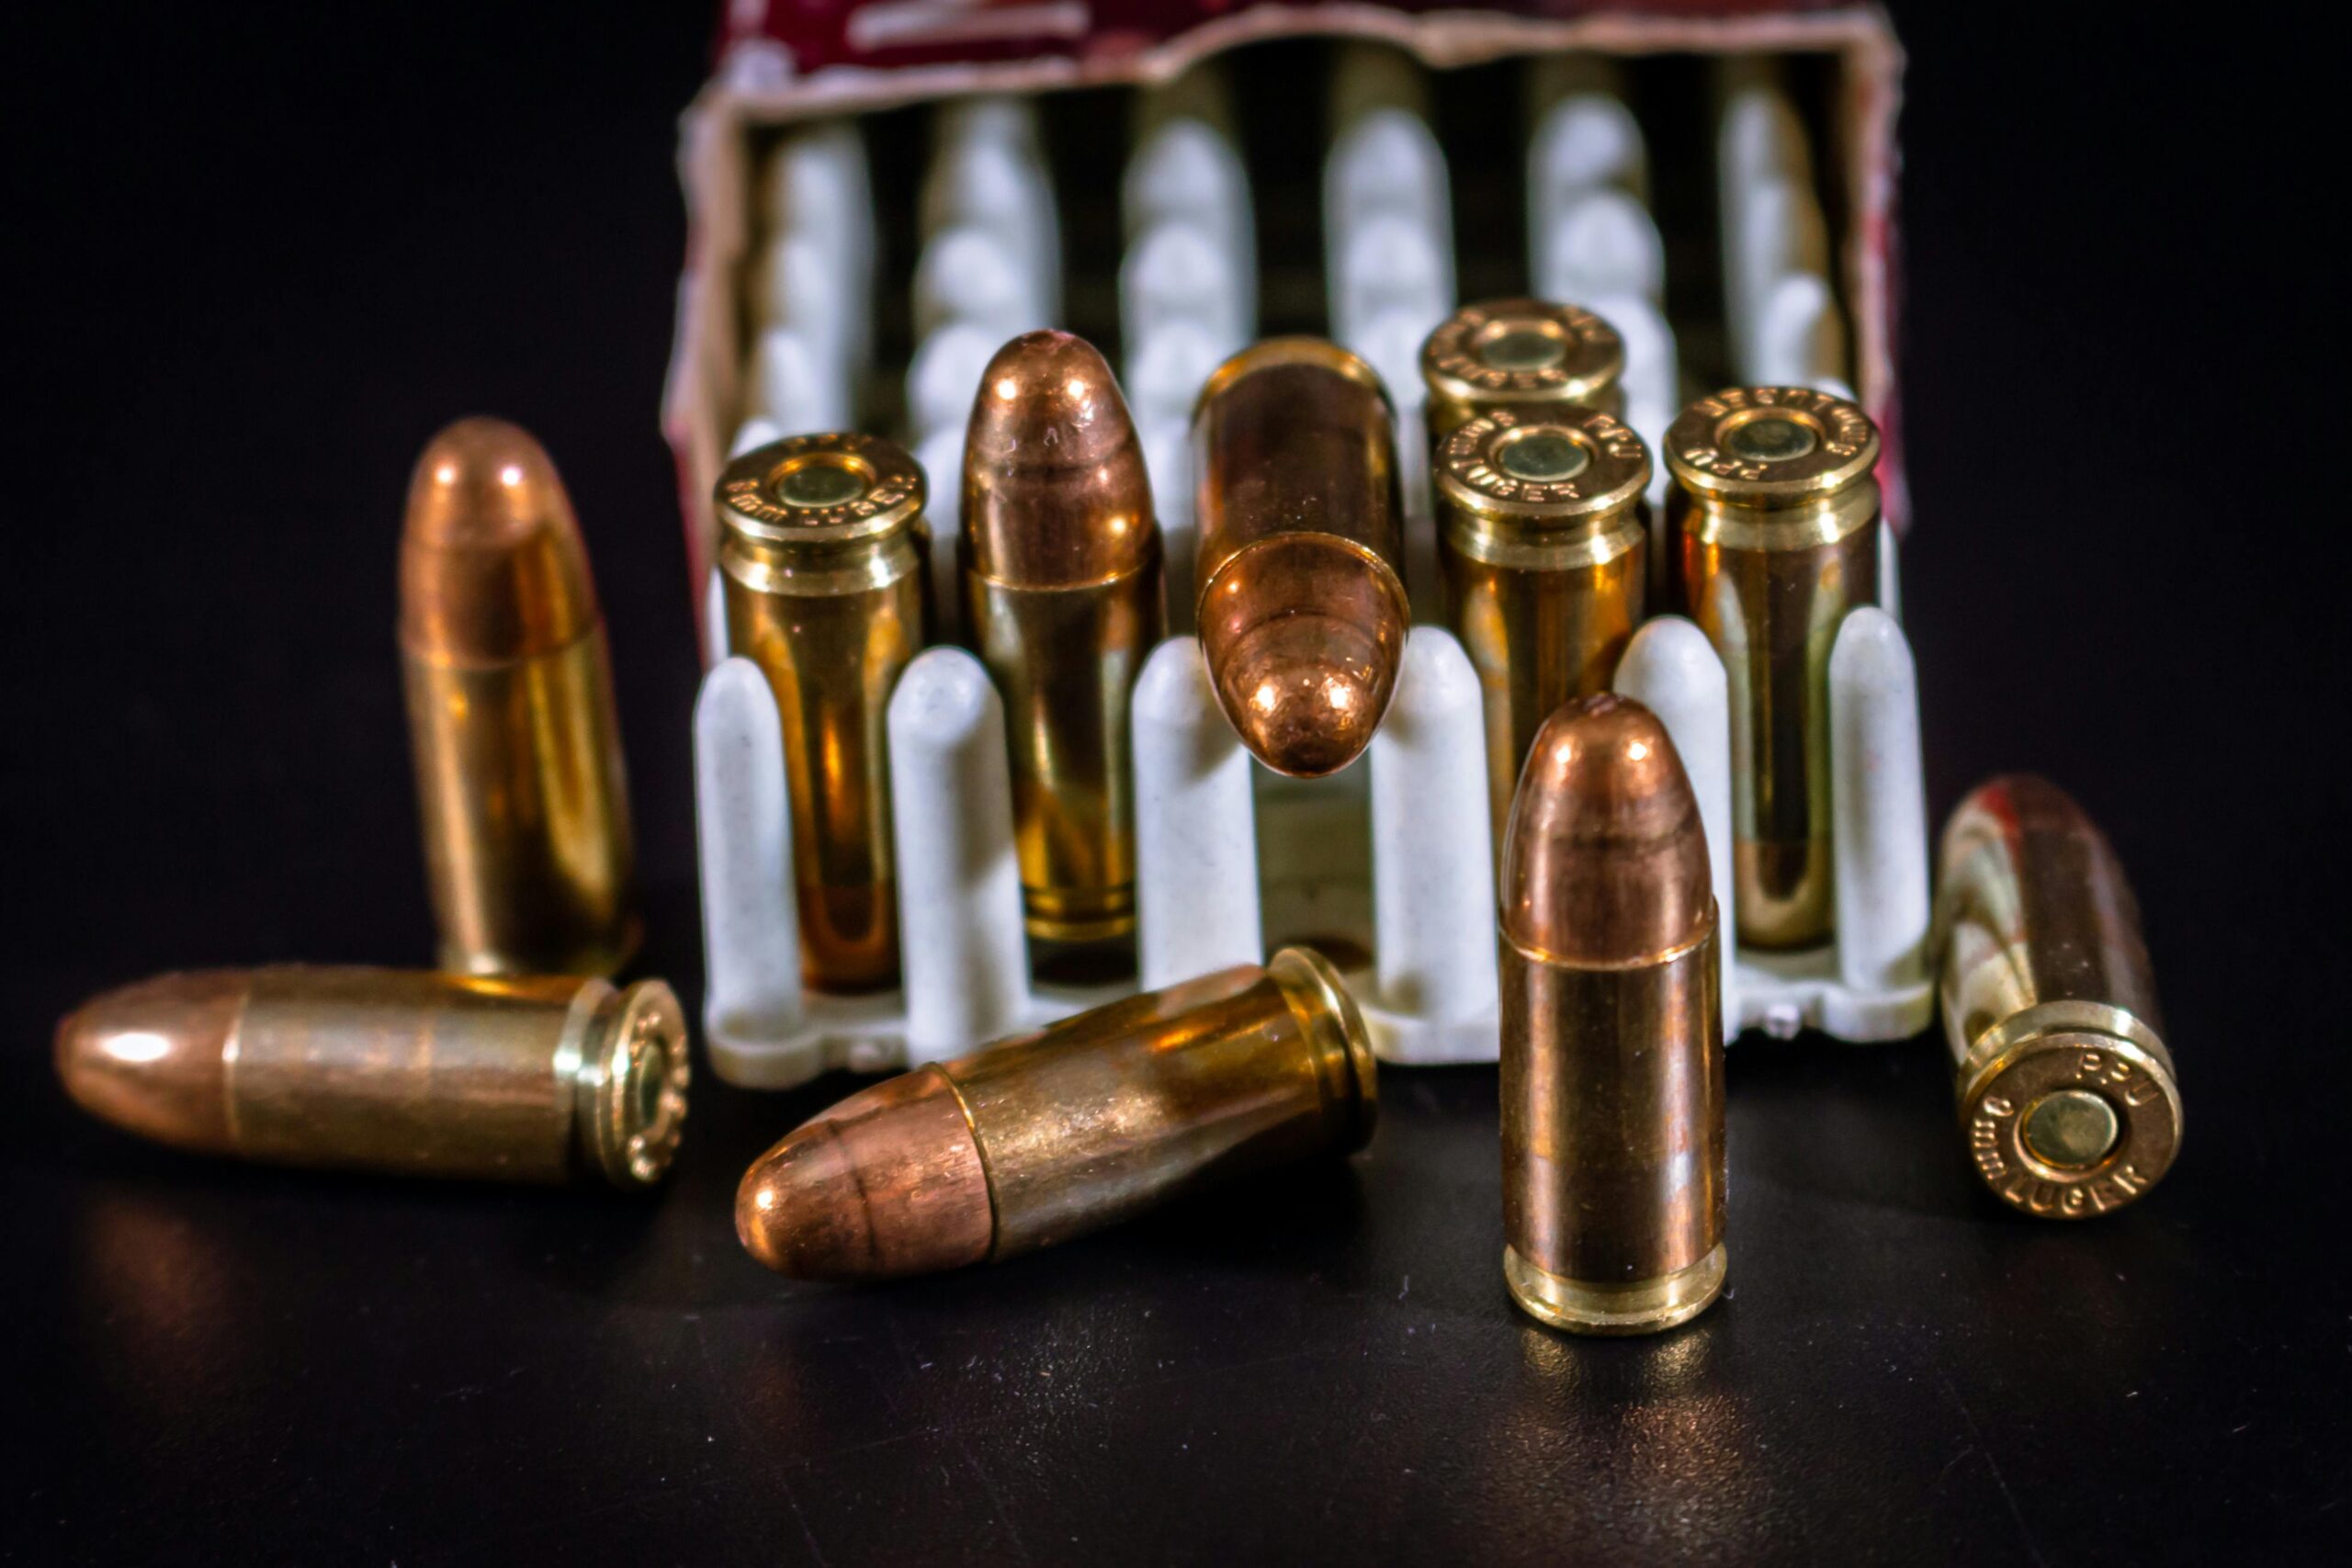 Choosing the Right Caliber for Concealed Carry Insights & Considerations